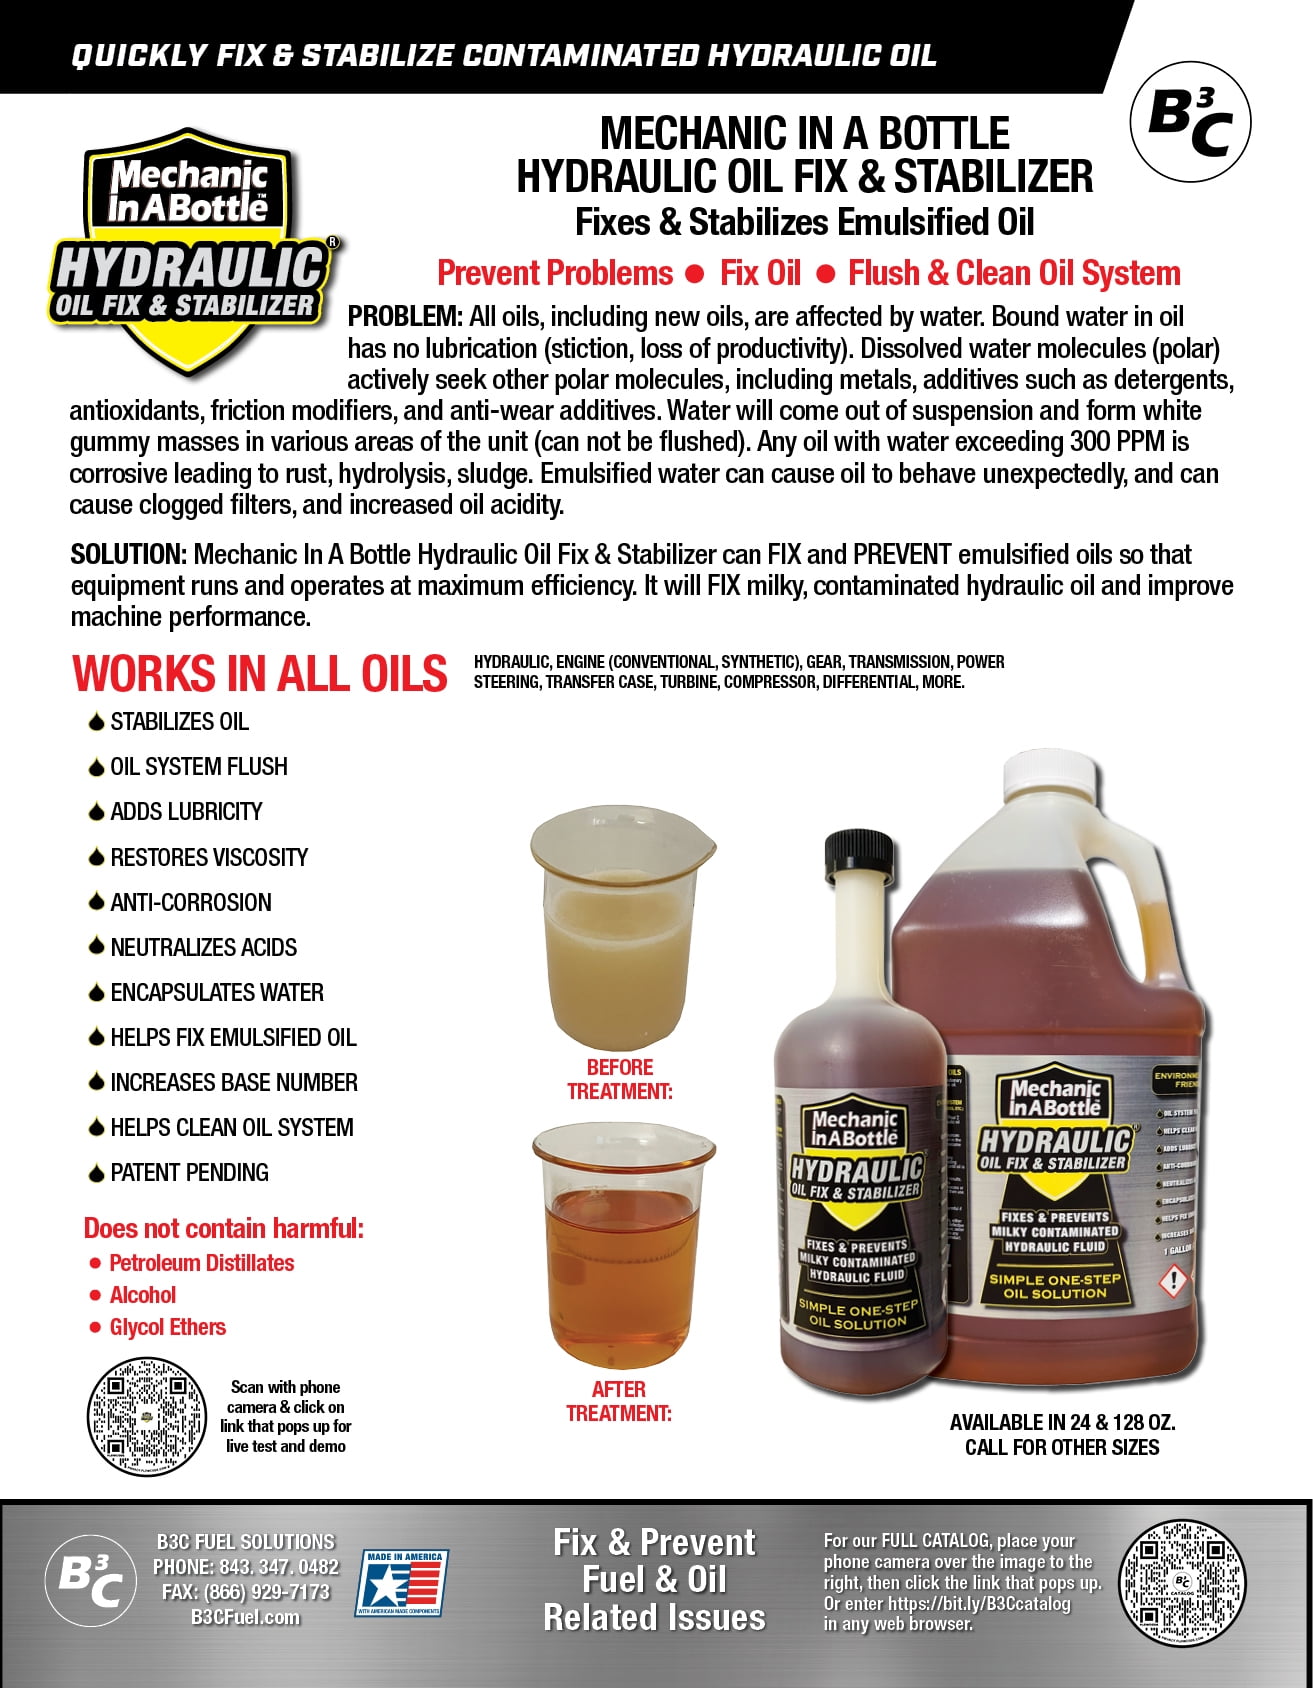 Mechanic In A Bottle 1 Gallon Hydraulic Oil with Stabilizers, Lubricity,  Anti-Corrosion, and Oil System Flush in the Hydraulic Oils department at